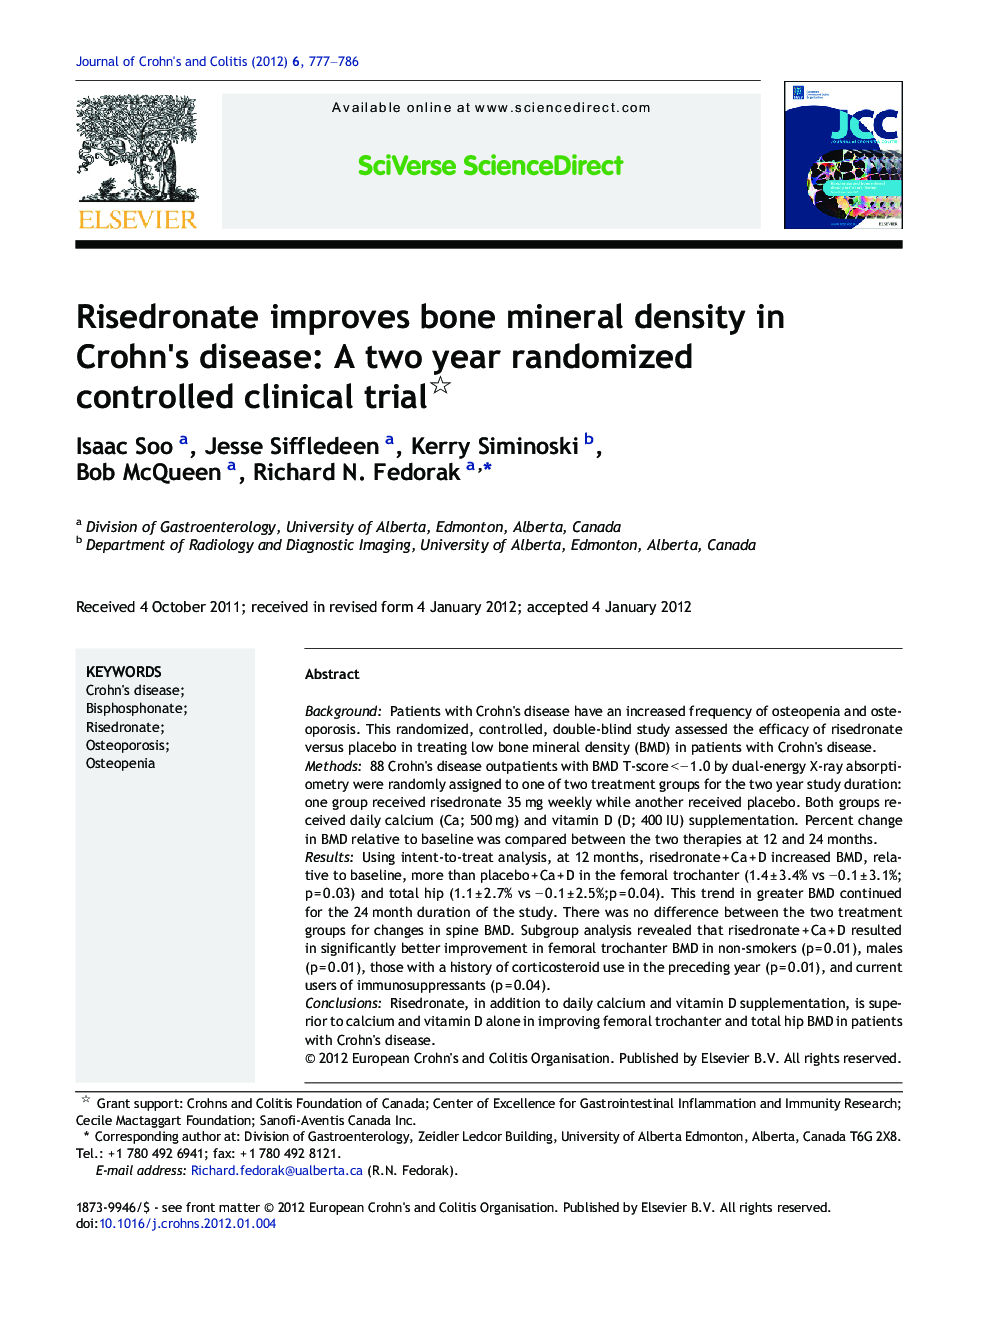 Risedronate improves bone mineral density in Crohn's disease: A two year randomized controlled clinical trial